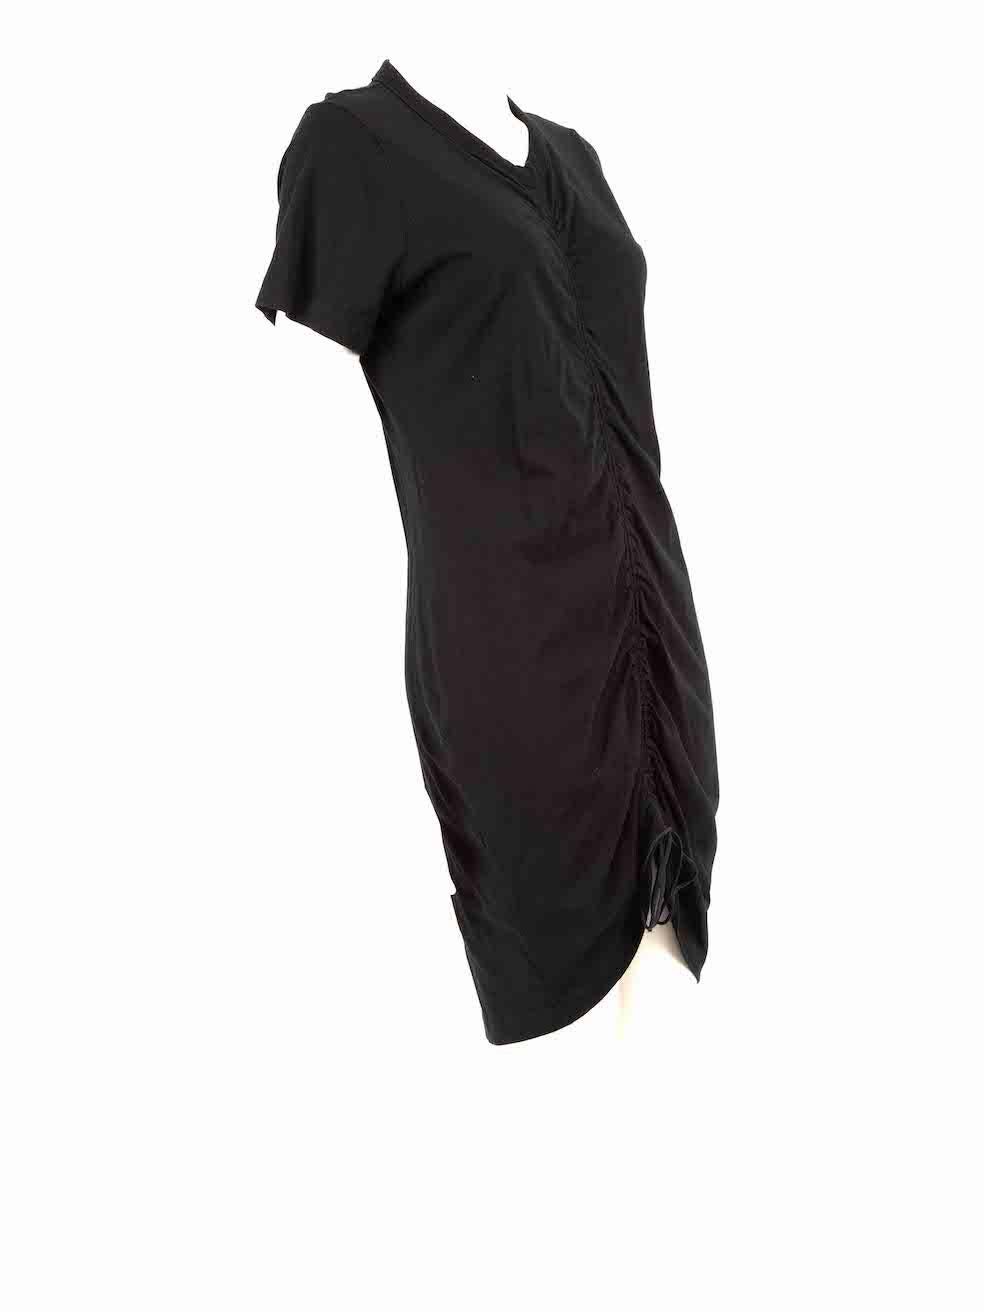 CONDITION is Very good. Hardly any visible wear to dress is evident on this used Alexander Wang designer resale item.
 
 
 
 Details
 
 
 Black
 
 Cotton
 
 Dress
 
 Short sleeves
 
 Round neck
 
 Ruched front detail
 
 
 
 
 
 Made in Vietnam
 
 
